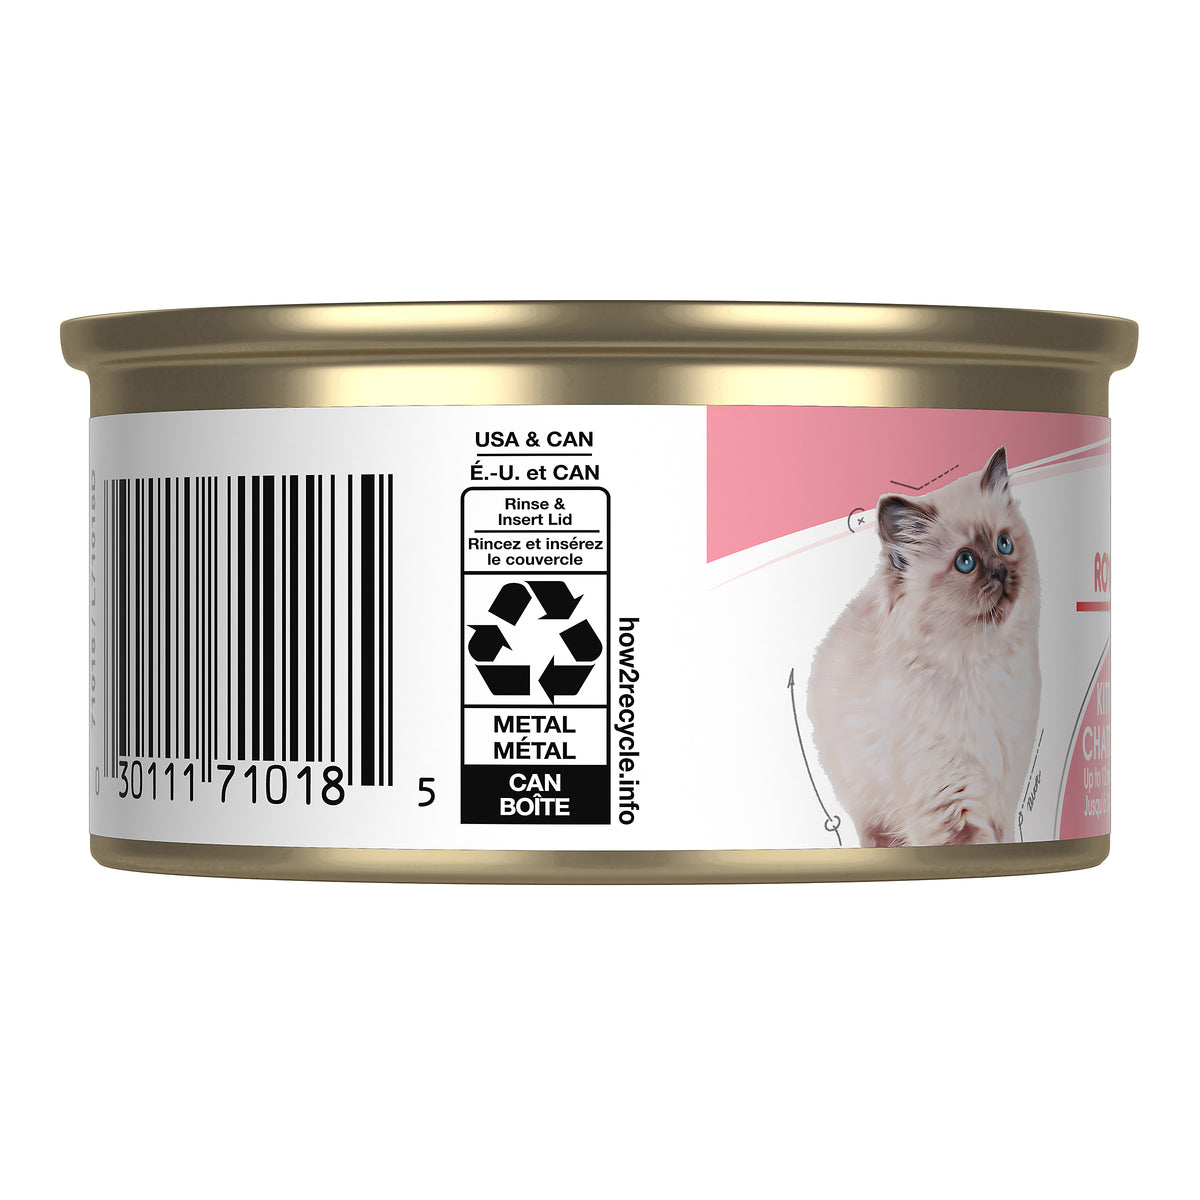 Royal Canin Kitten Loaf In Sauce Canned Cat Food (85g)